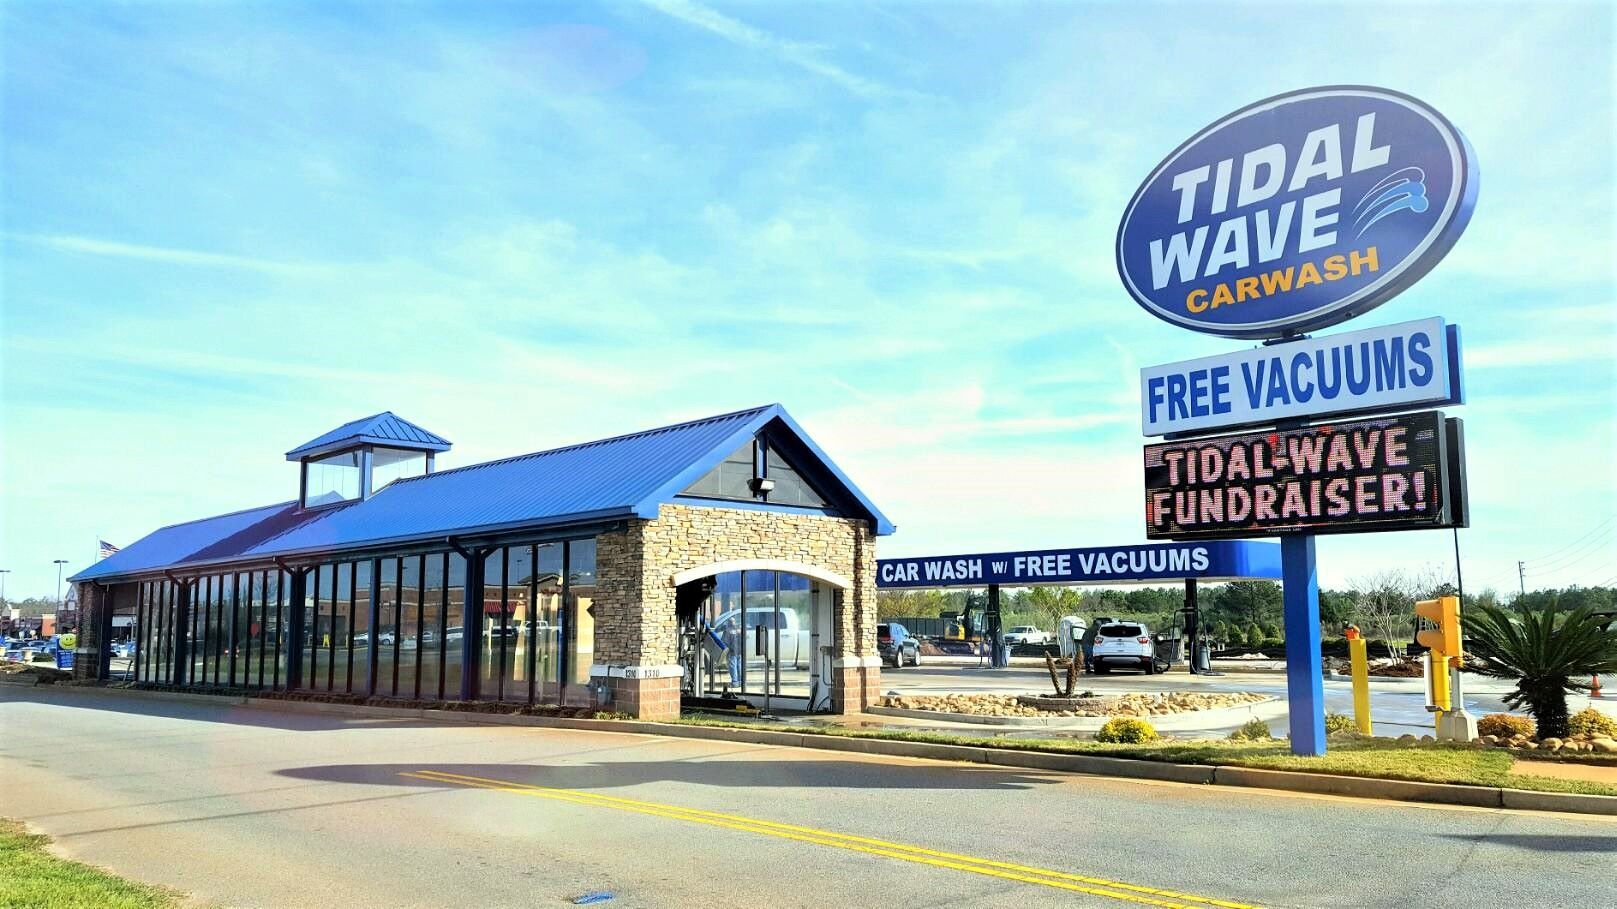 Discover The Surprising Cost Of Franchising A Tidal Wave Car Wash In The US